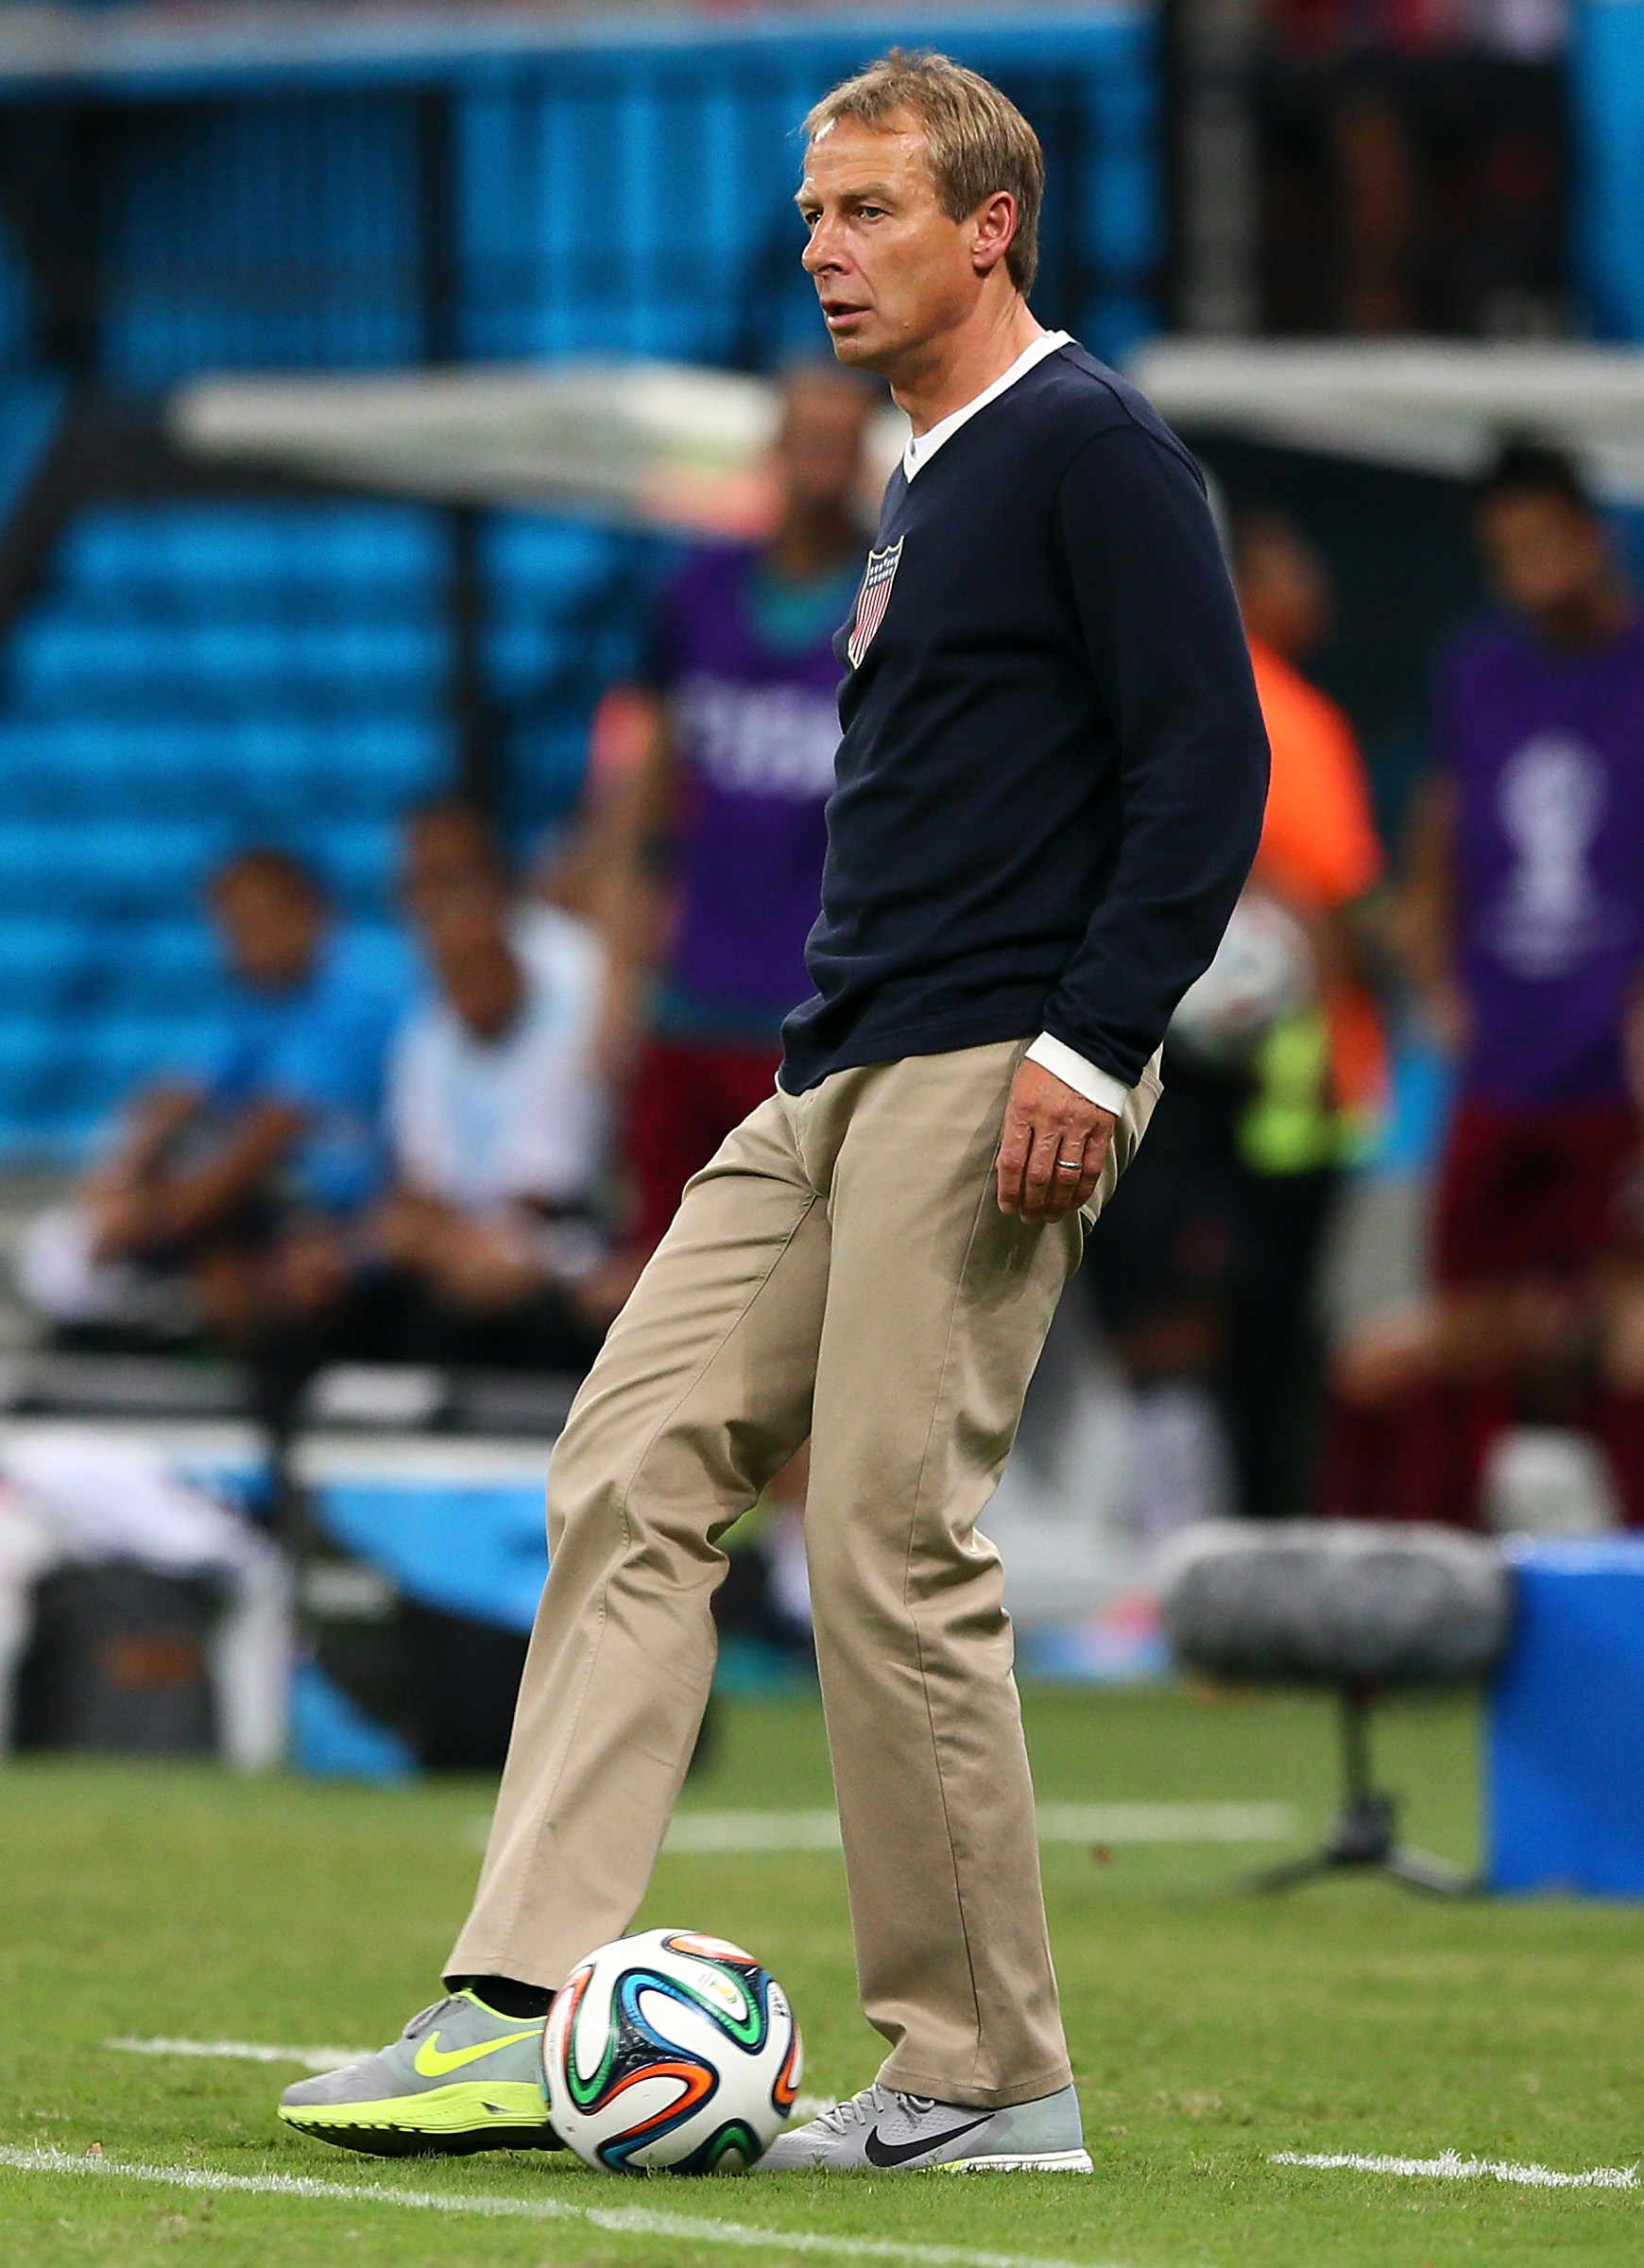 PHOTO: Head coach Jurgen Klinsmann of the United States stands on the sideline during the 2014 FIFA World Cup Brazil Group G match between the United States and Portugal at Arena Amazonia, June 22, 2014 in Manaus, Brazil.